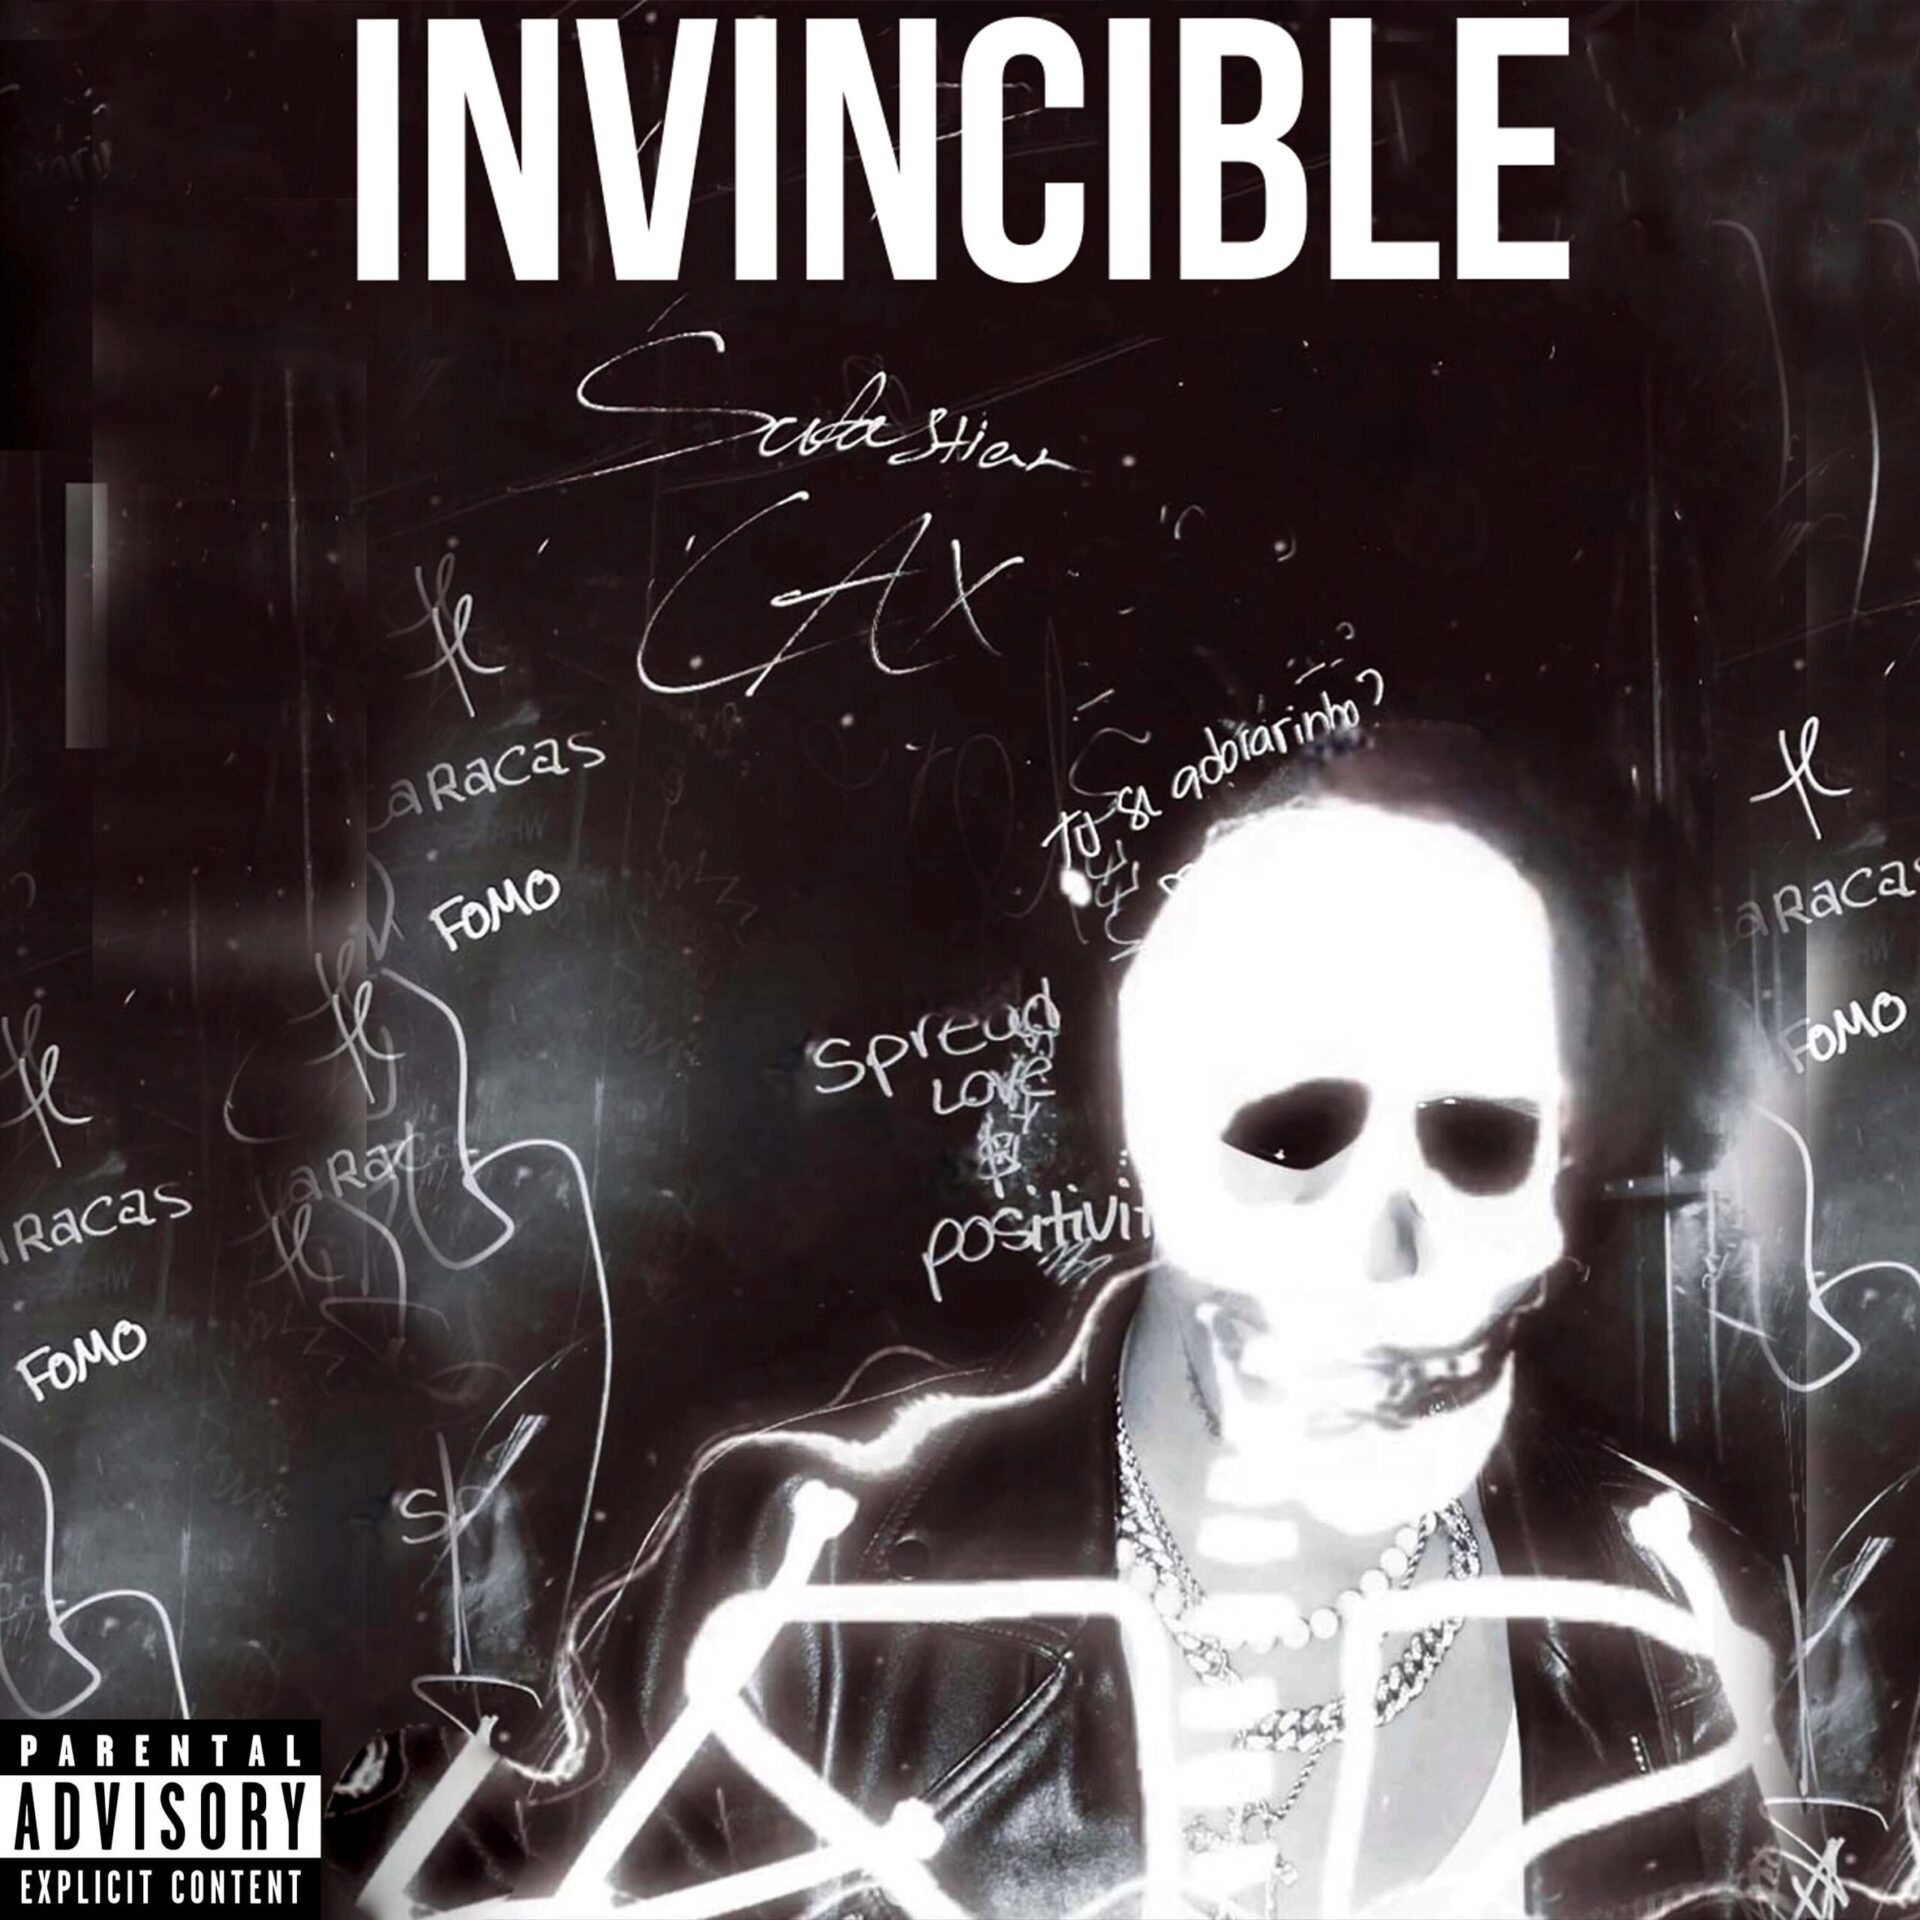 Invincible by Sabastianlax cover art